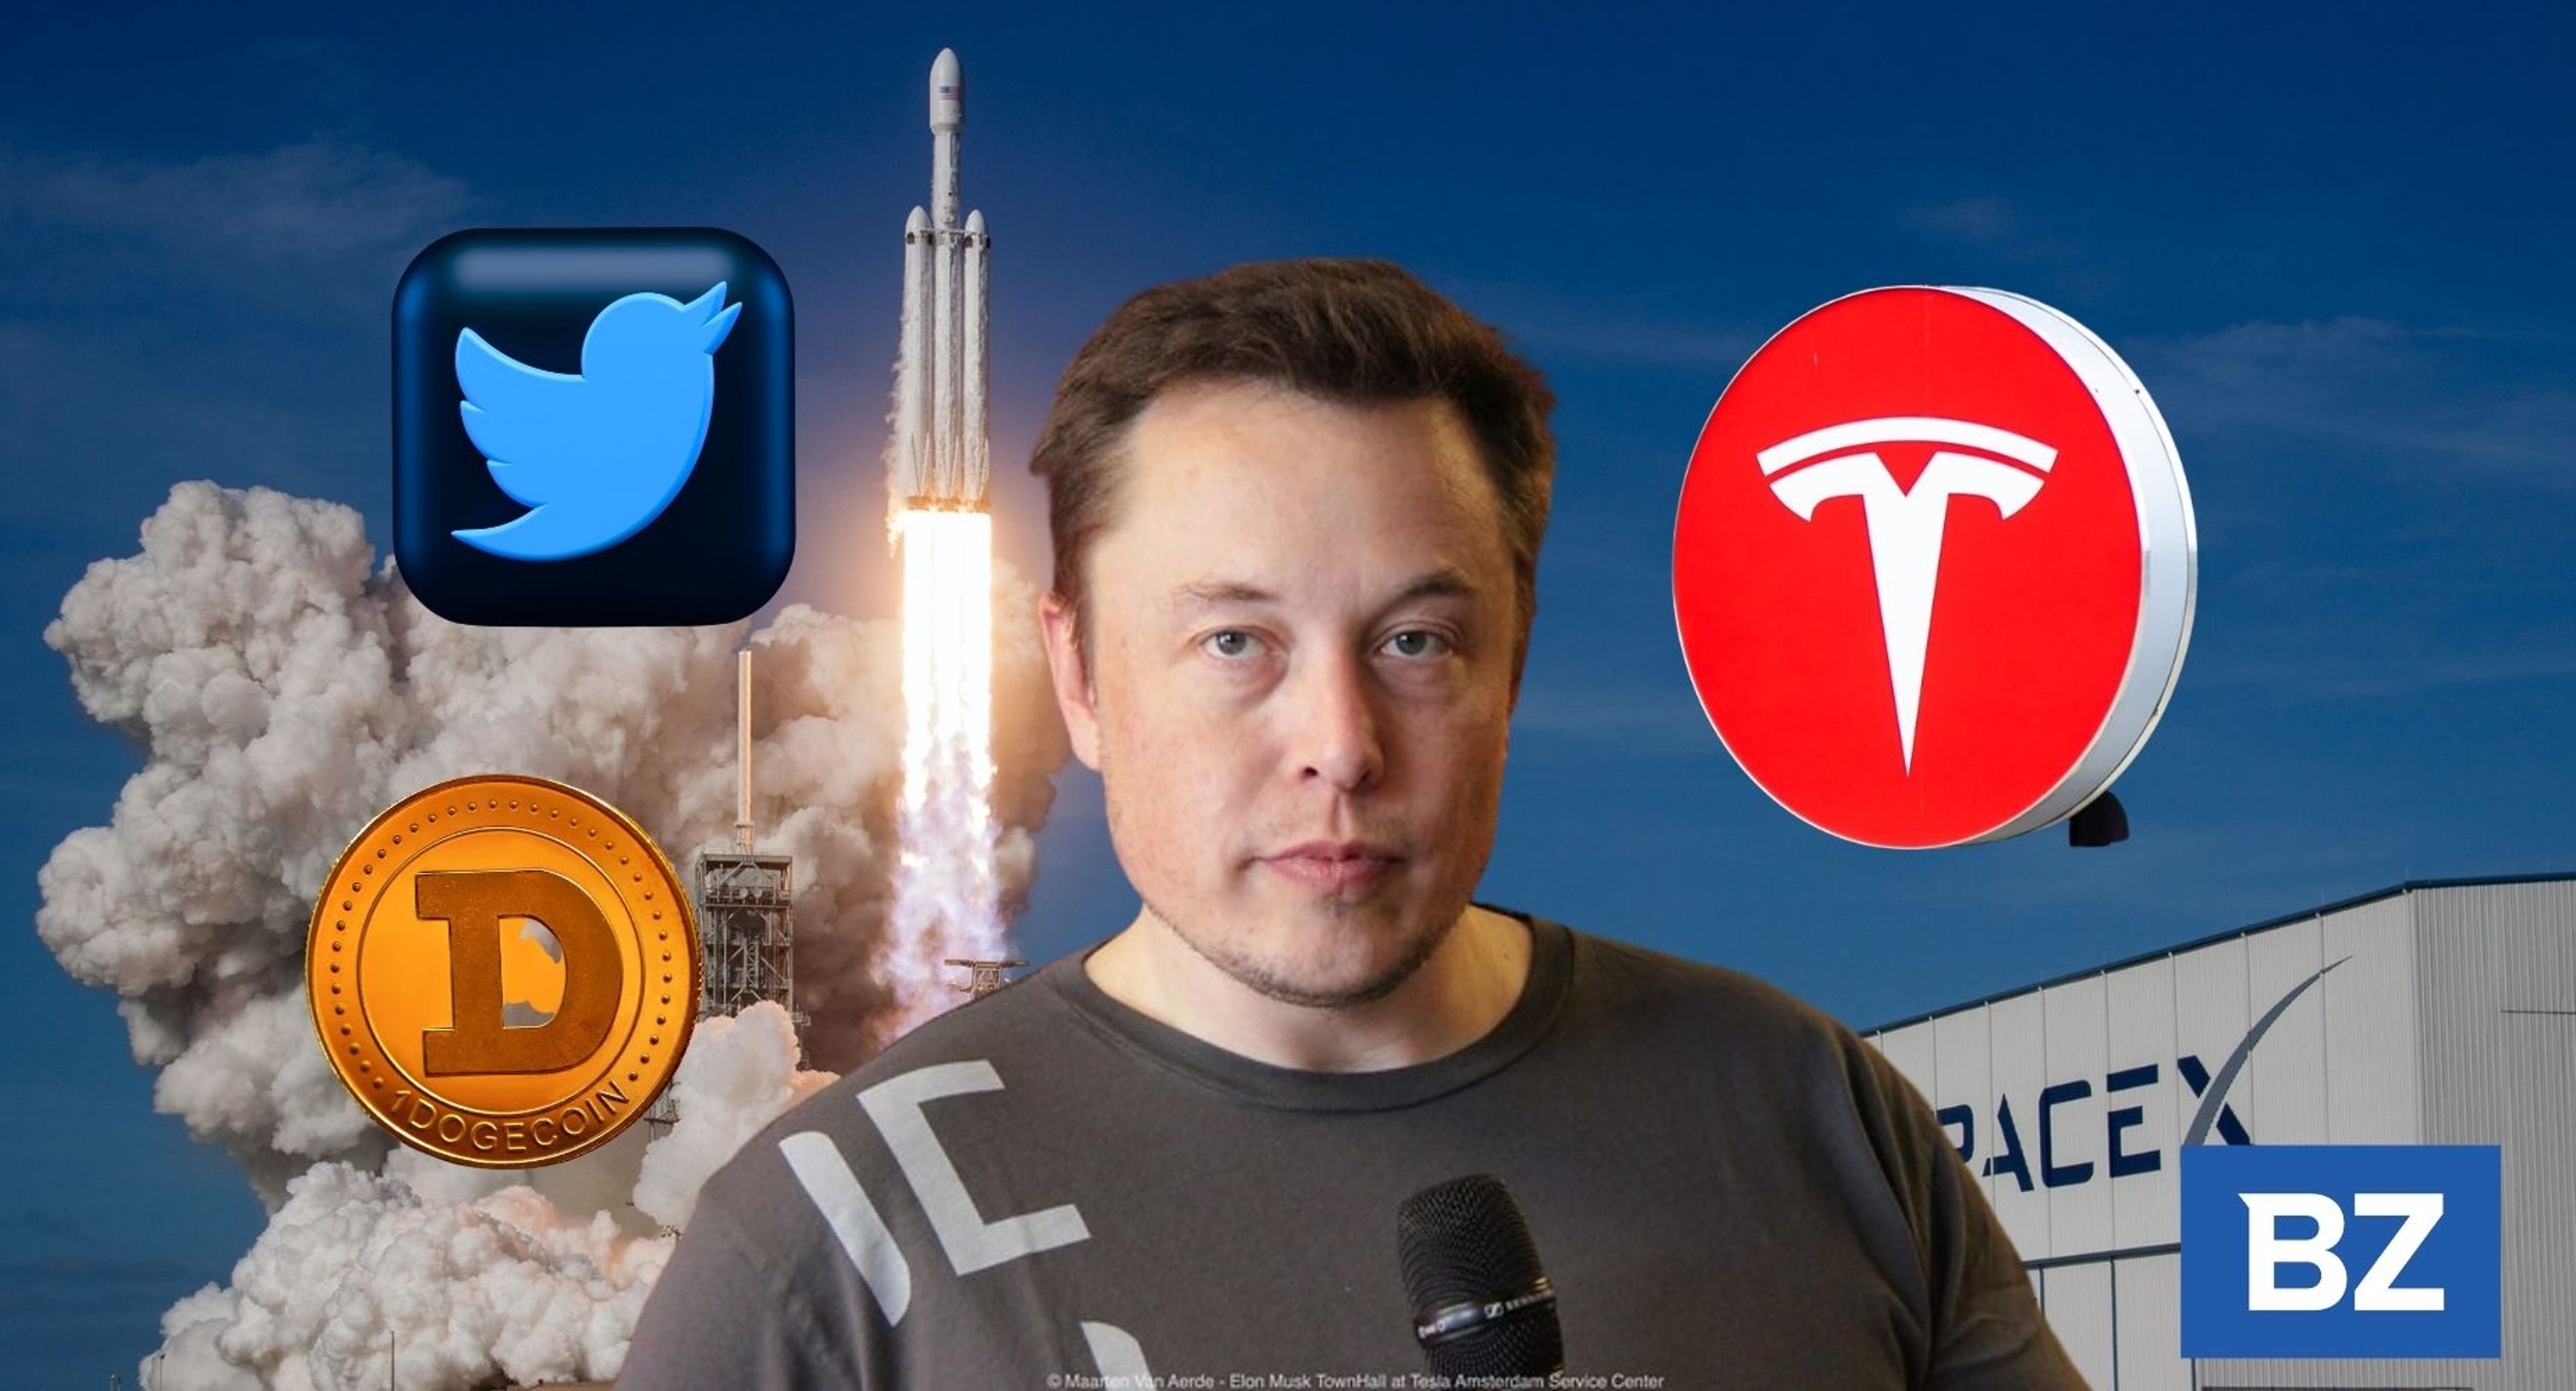 Will Tesla, Twitter, SpaceX Or Dogecoin Perform Better Over The Next Five Years? 40% Of Benzinga Twitter Followers Said This